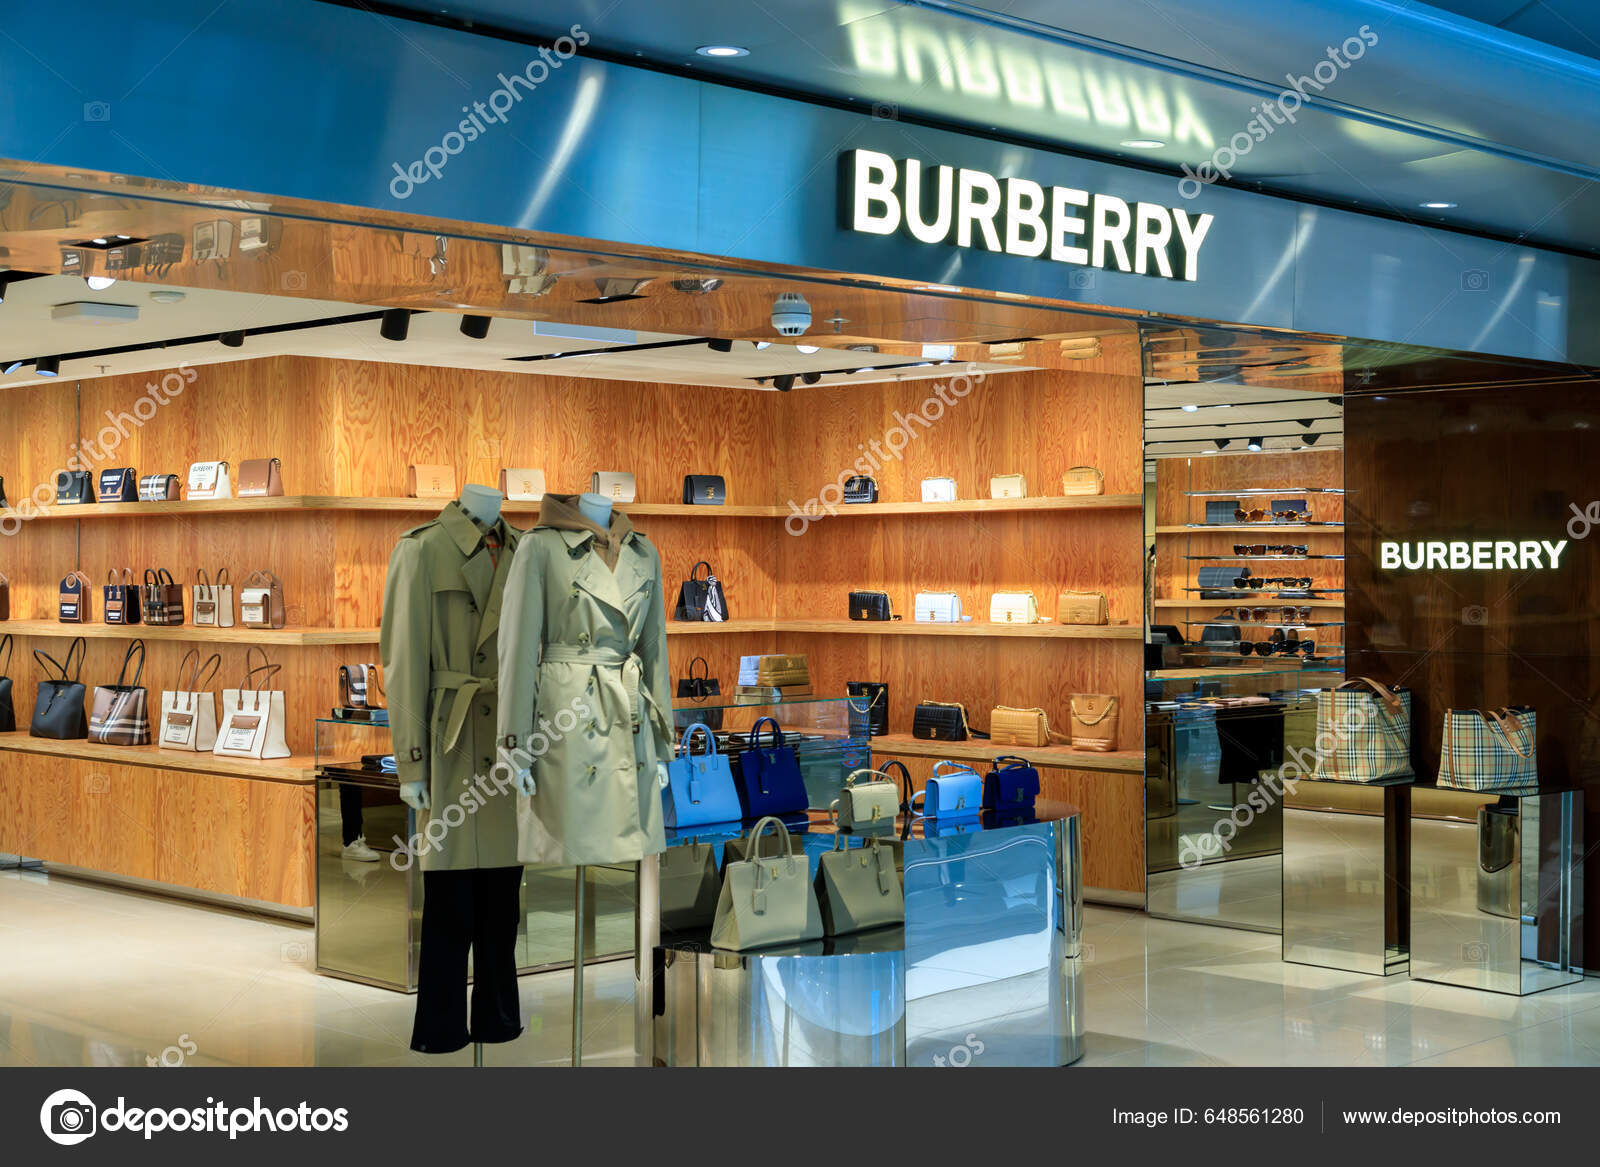 Burberry outlet Stock Photos, Royalty Free Burberry outlet Images |  Depositphotos